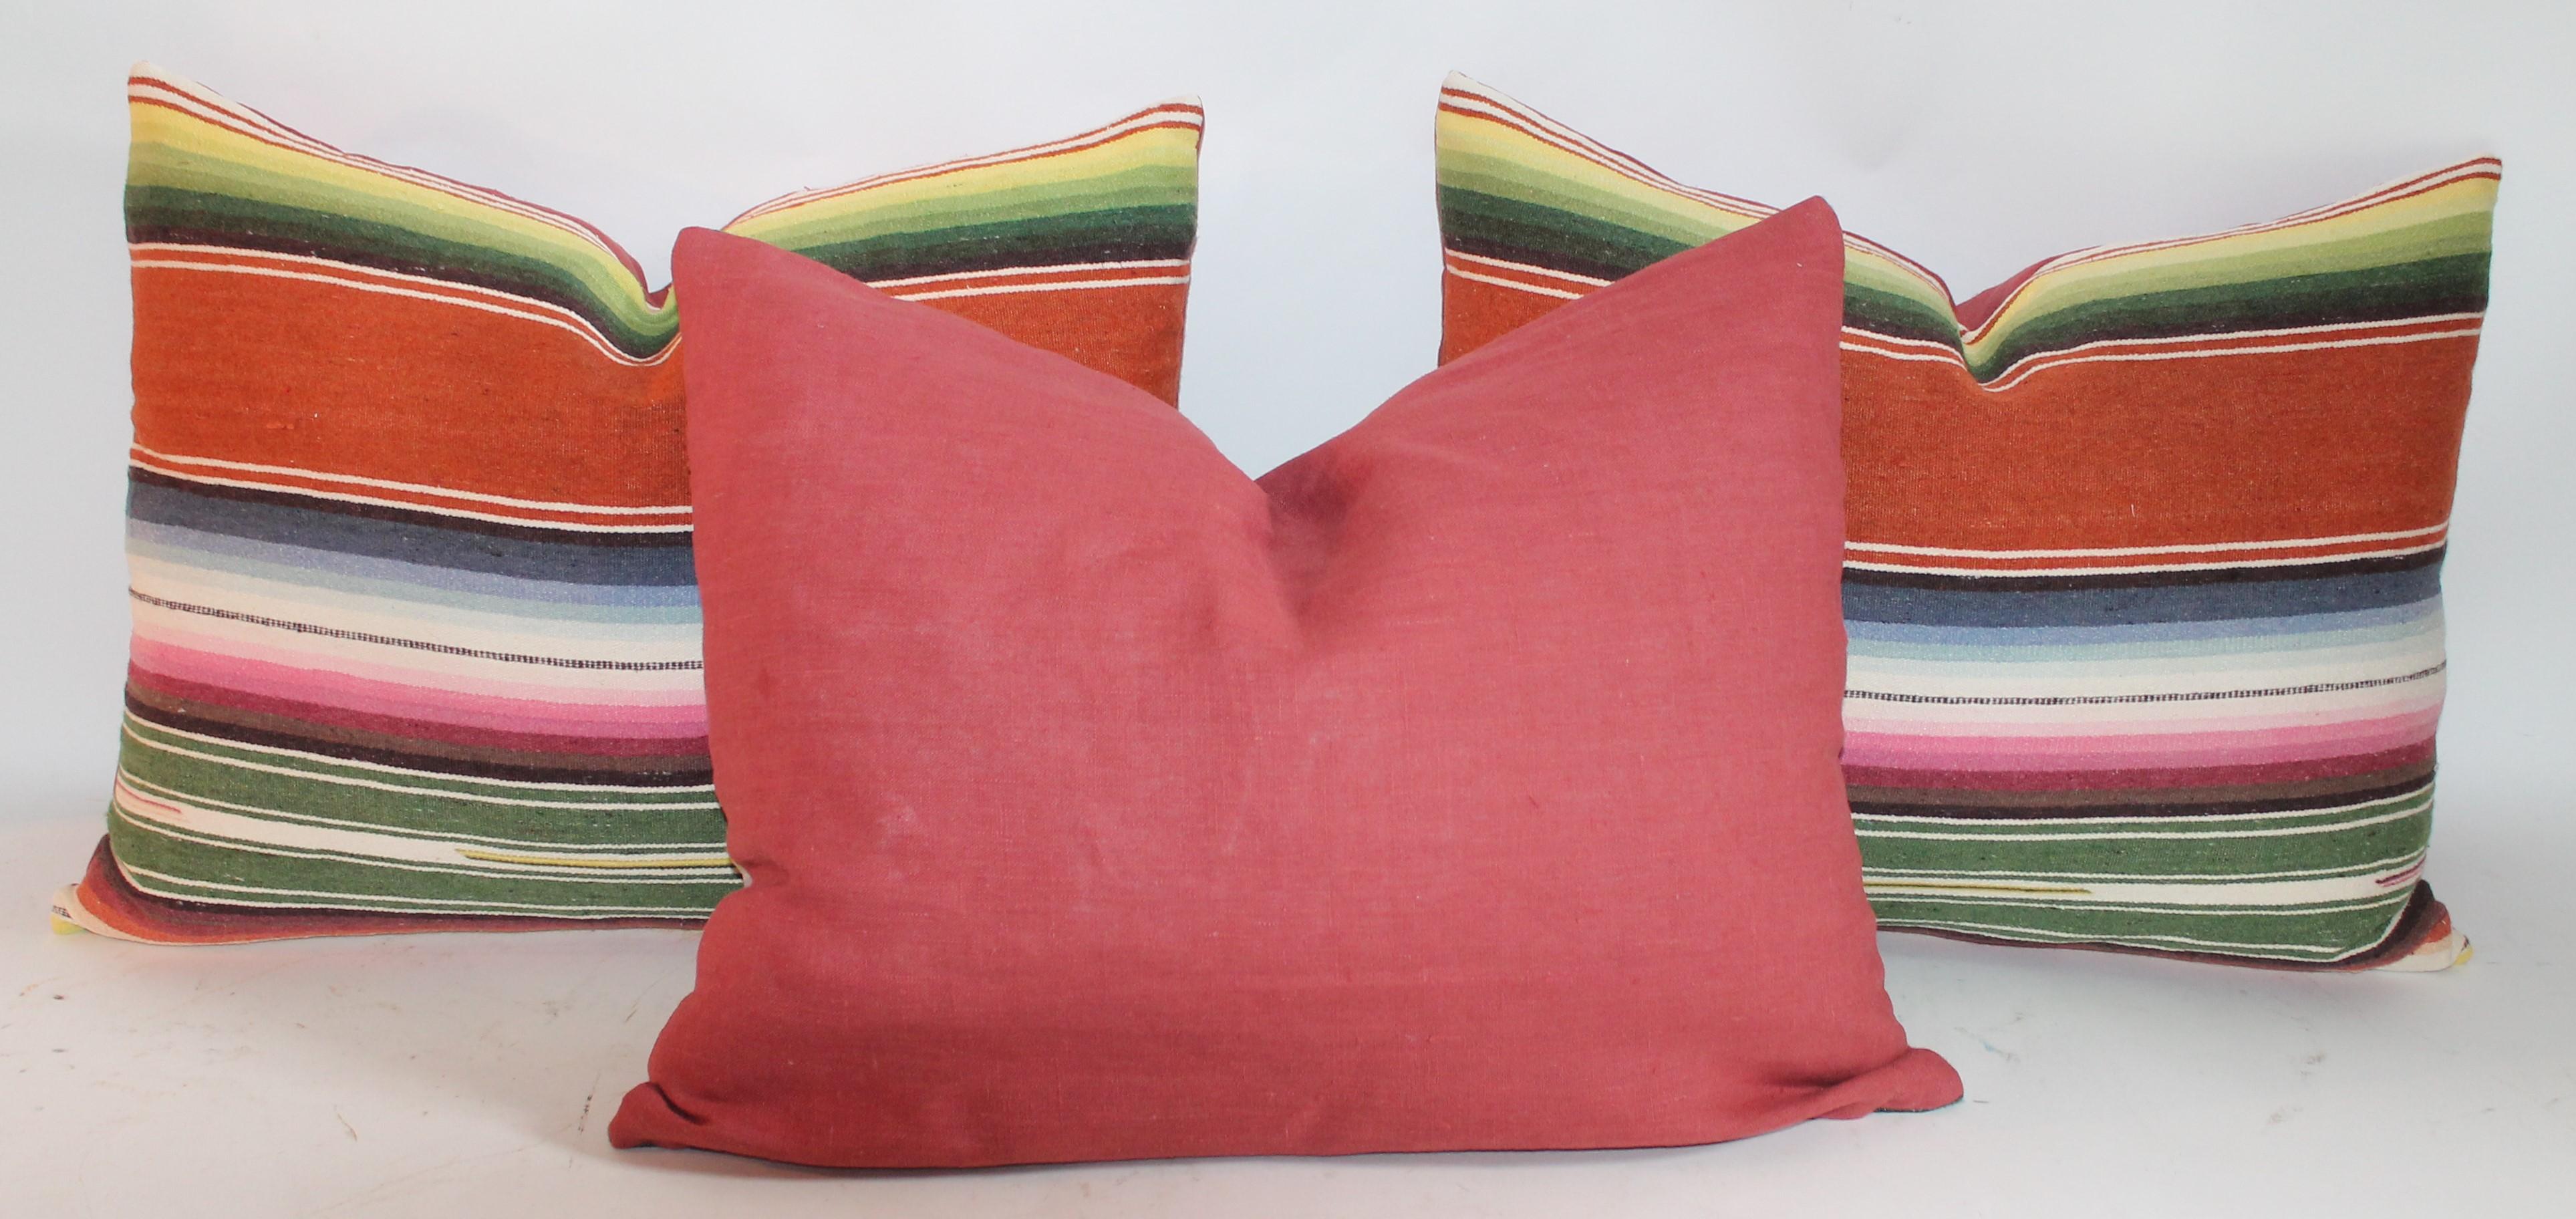 Hand-Crafted Serape Pillows in Burnt Orange, Collection of Three